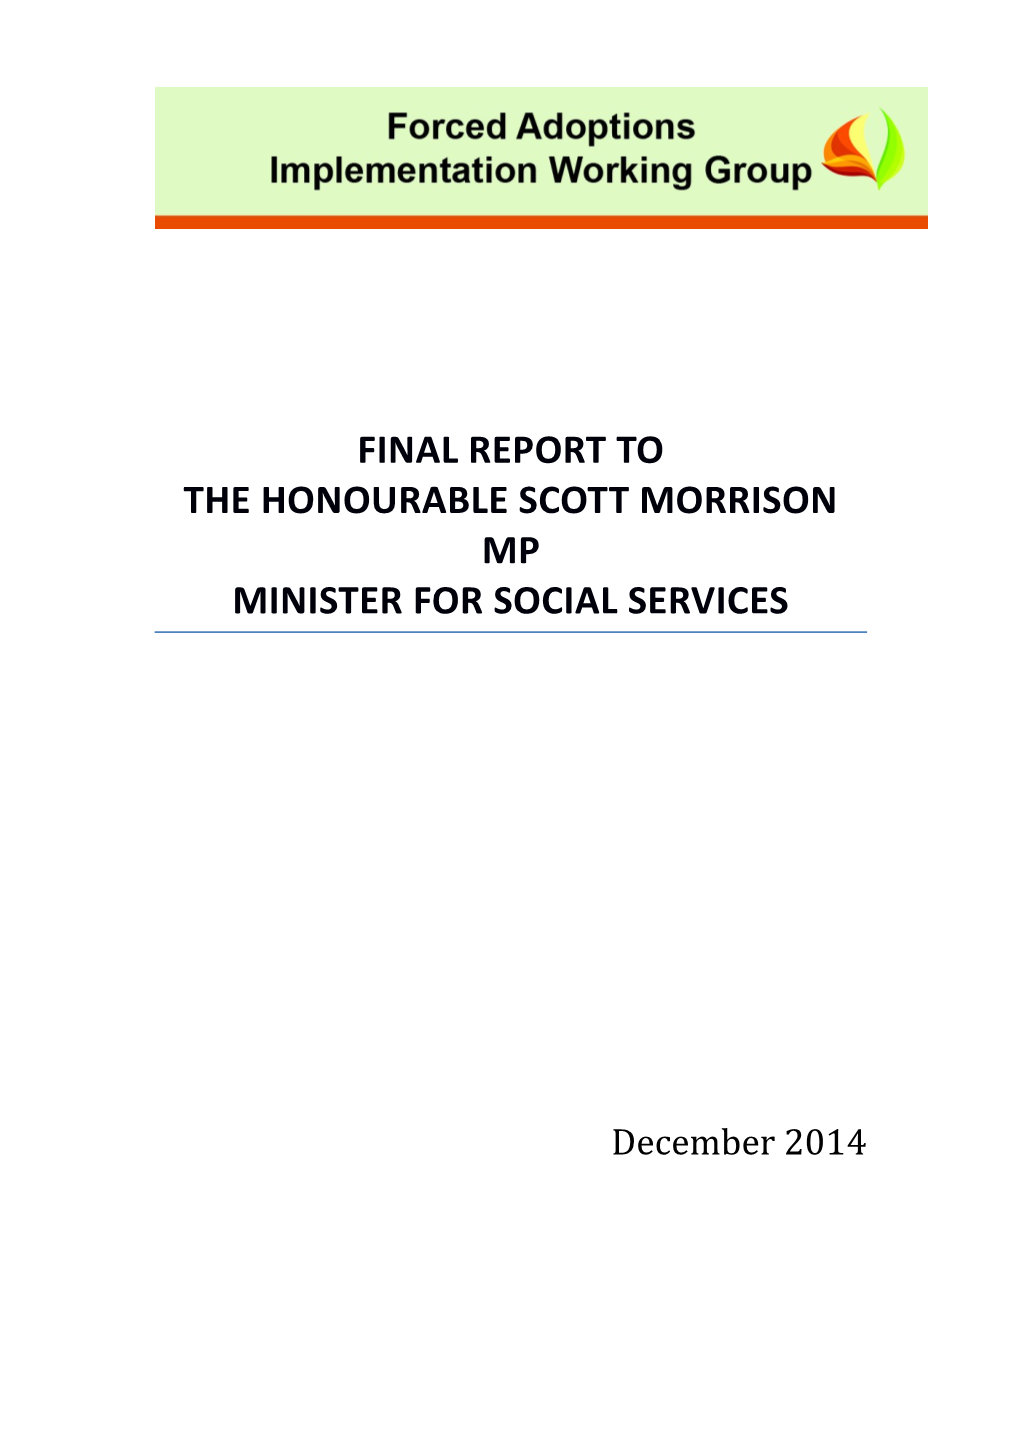 Forced Adoptions Implementation Working Group Final Report